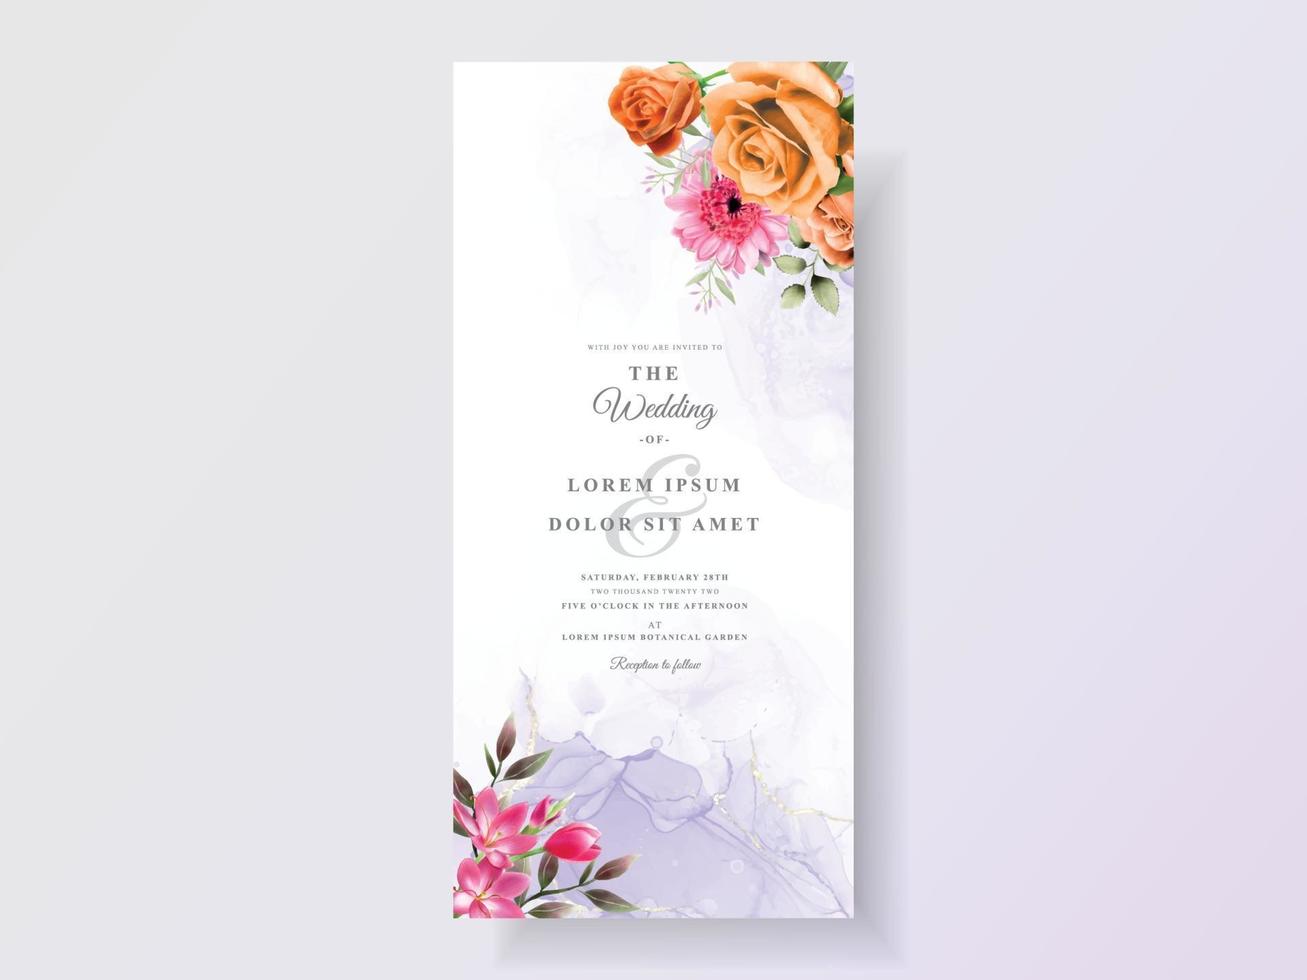 Abstract and floral watercolor wedding invitations vector